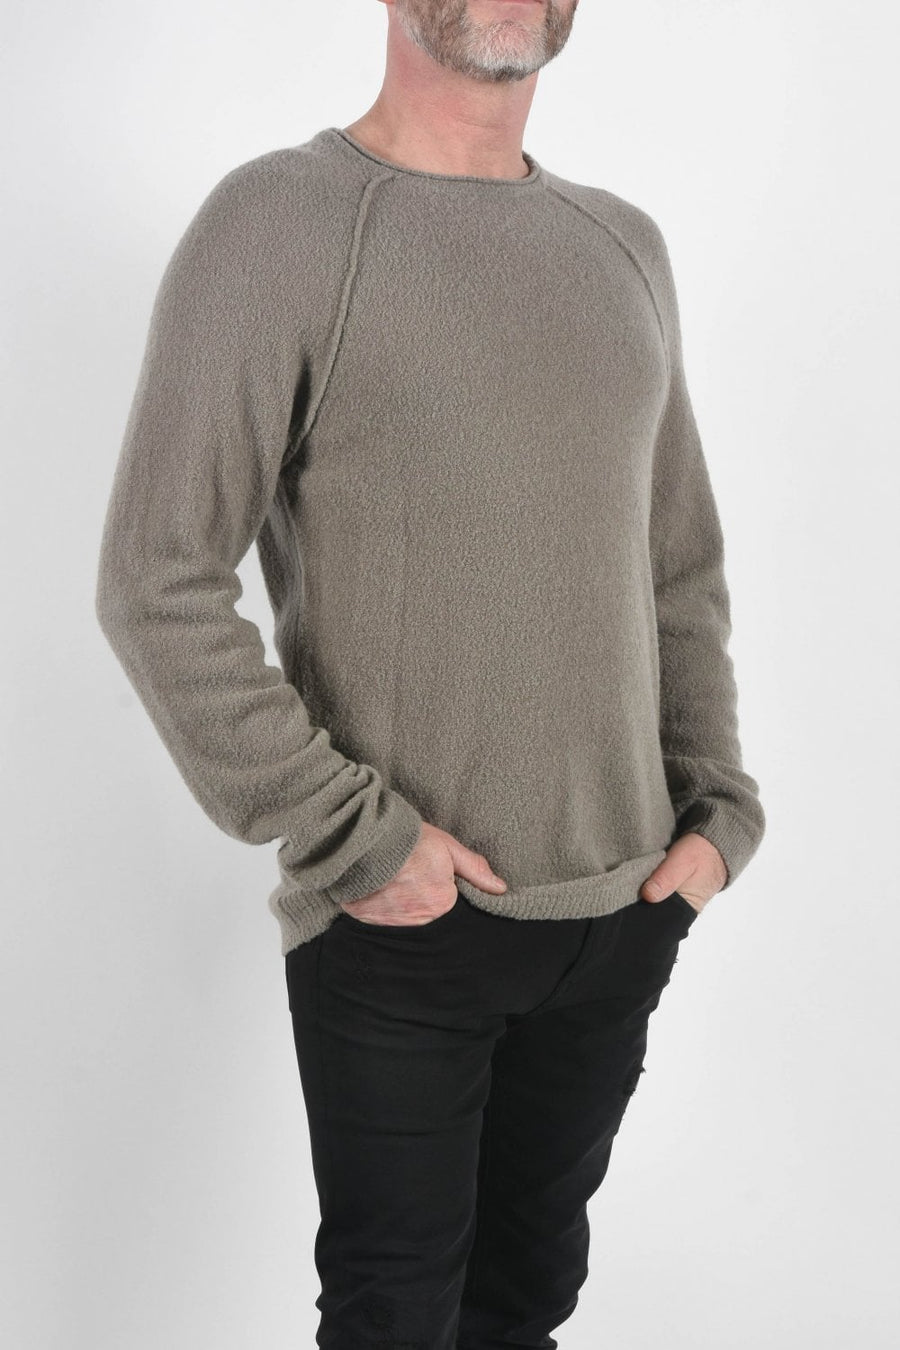 Buy the Daniele Fiesoli Boiled Wool Round Neck Knit Taupe at Intro. Spend £100 for free next day UK delivery. Official stockists. We ship worldwide